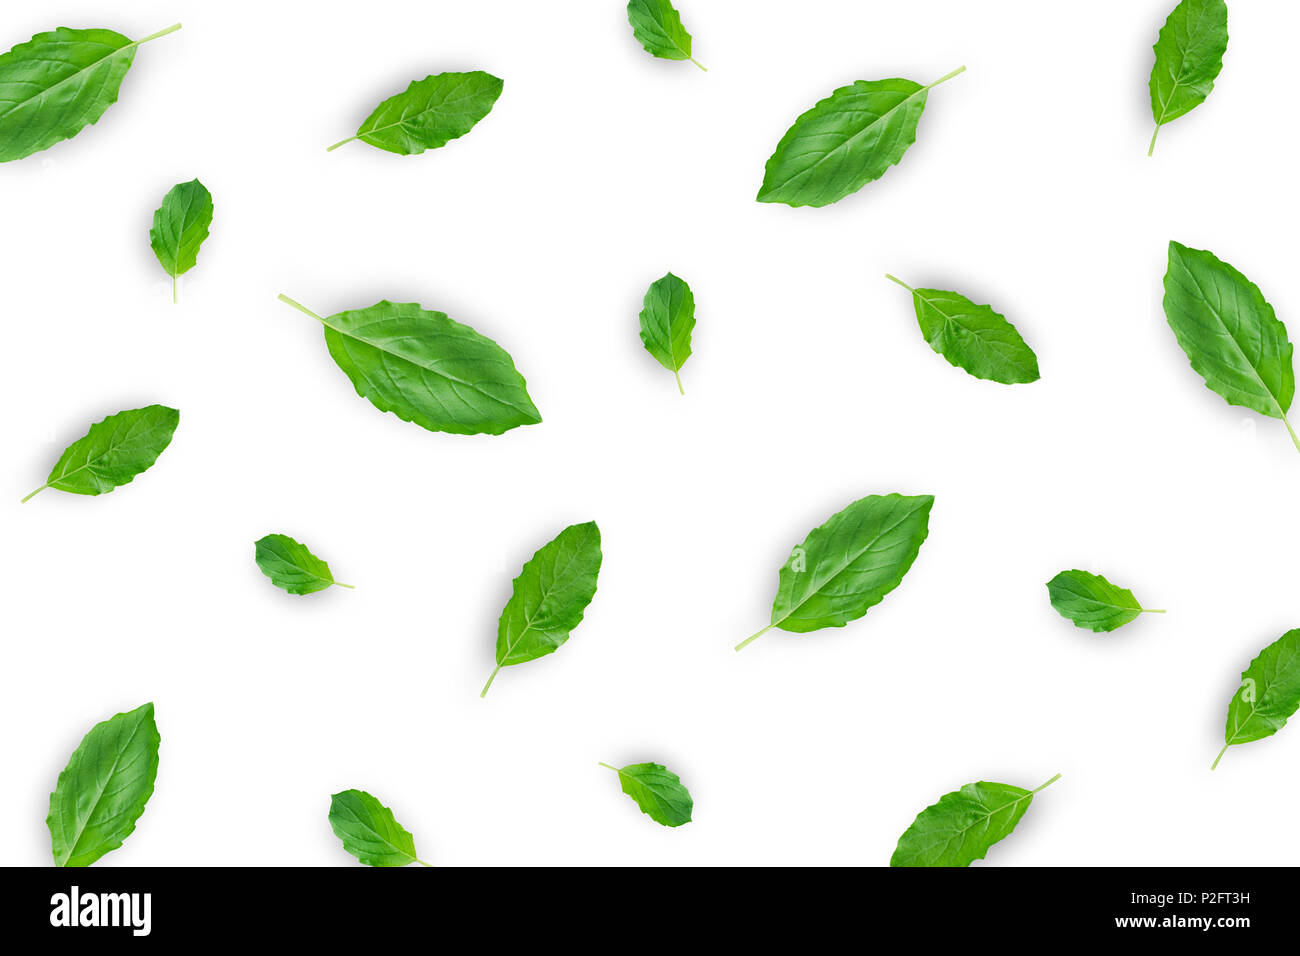 Top view of green leaves and fresh basil leaves on the white background. Abstract background by basil leaves. Stock Photo